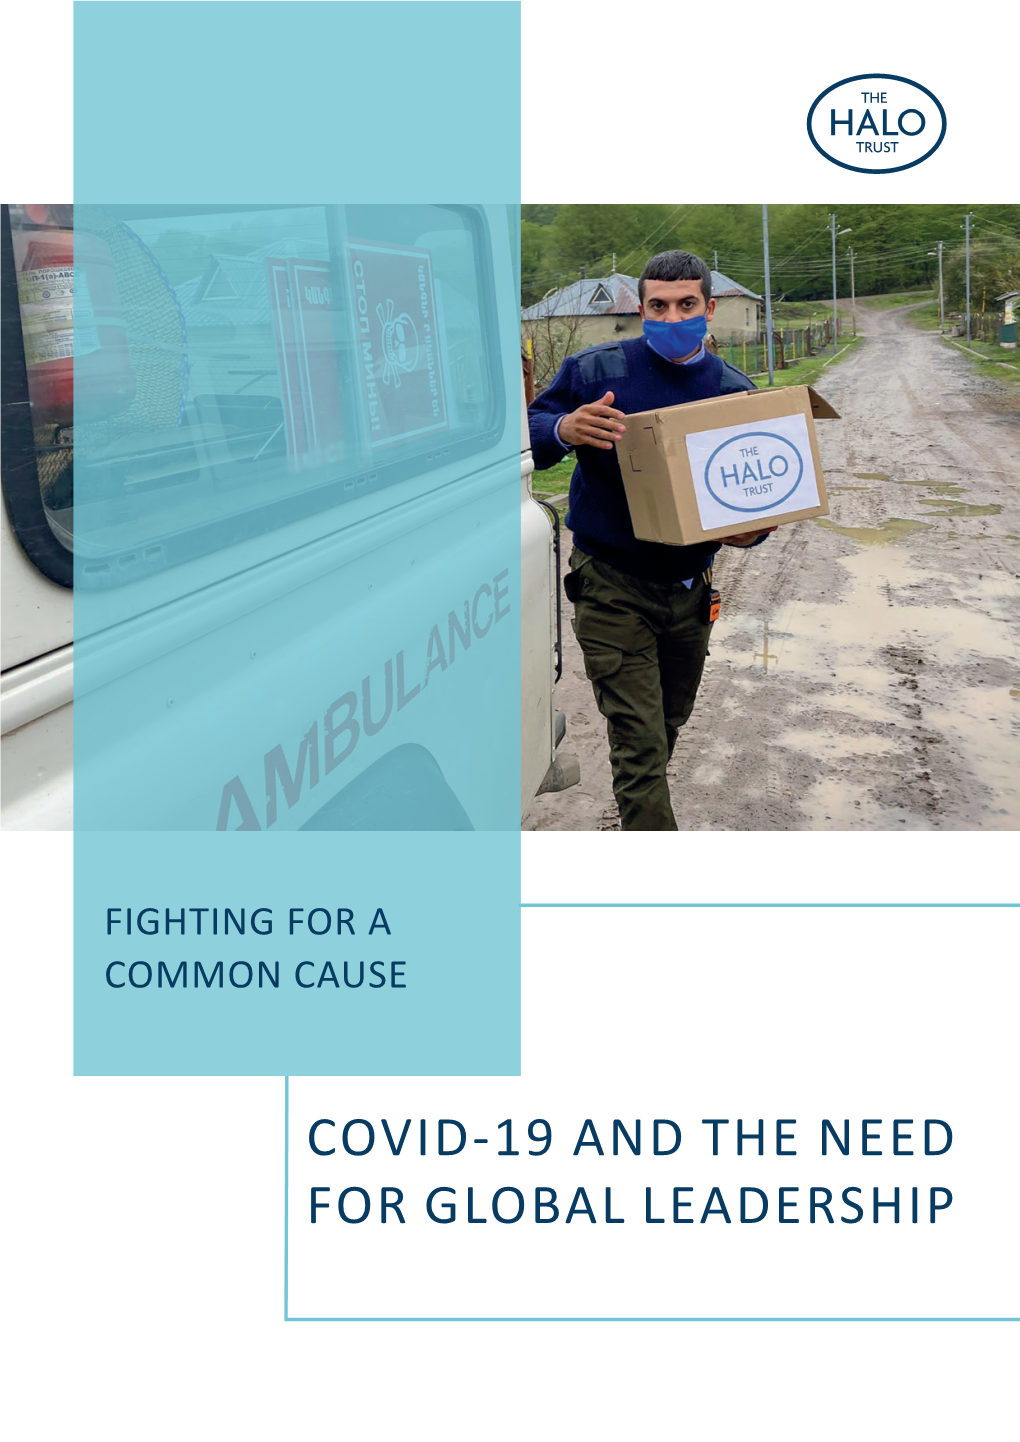 Covid-19 and the Need for Global Leadership 02